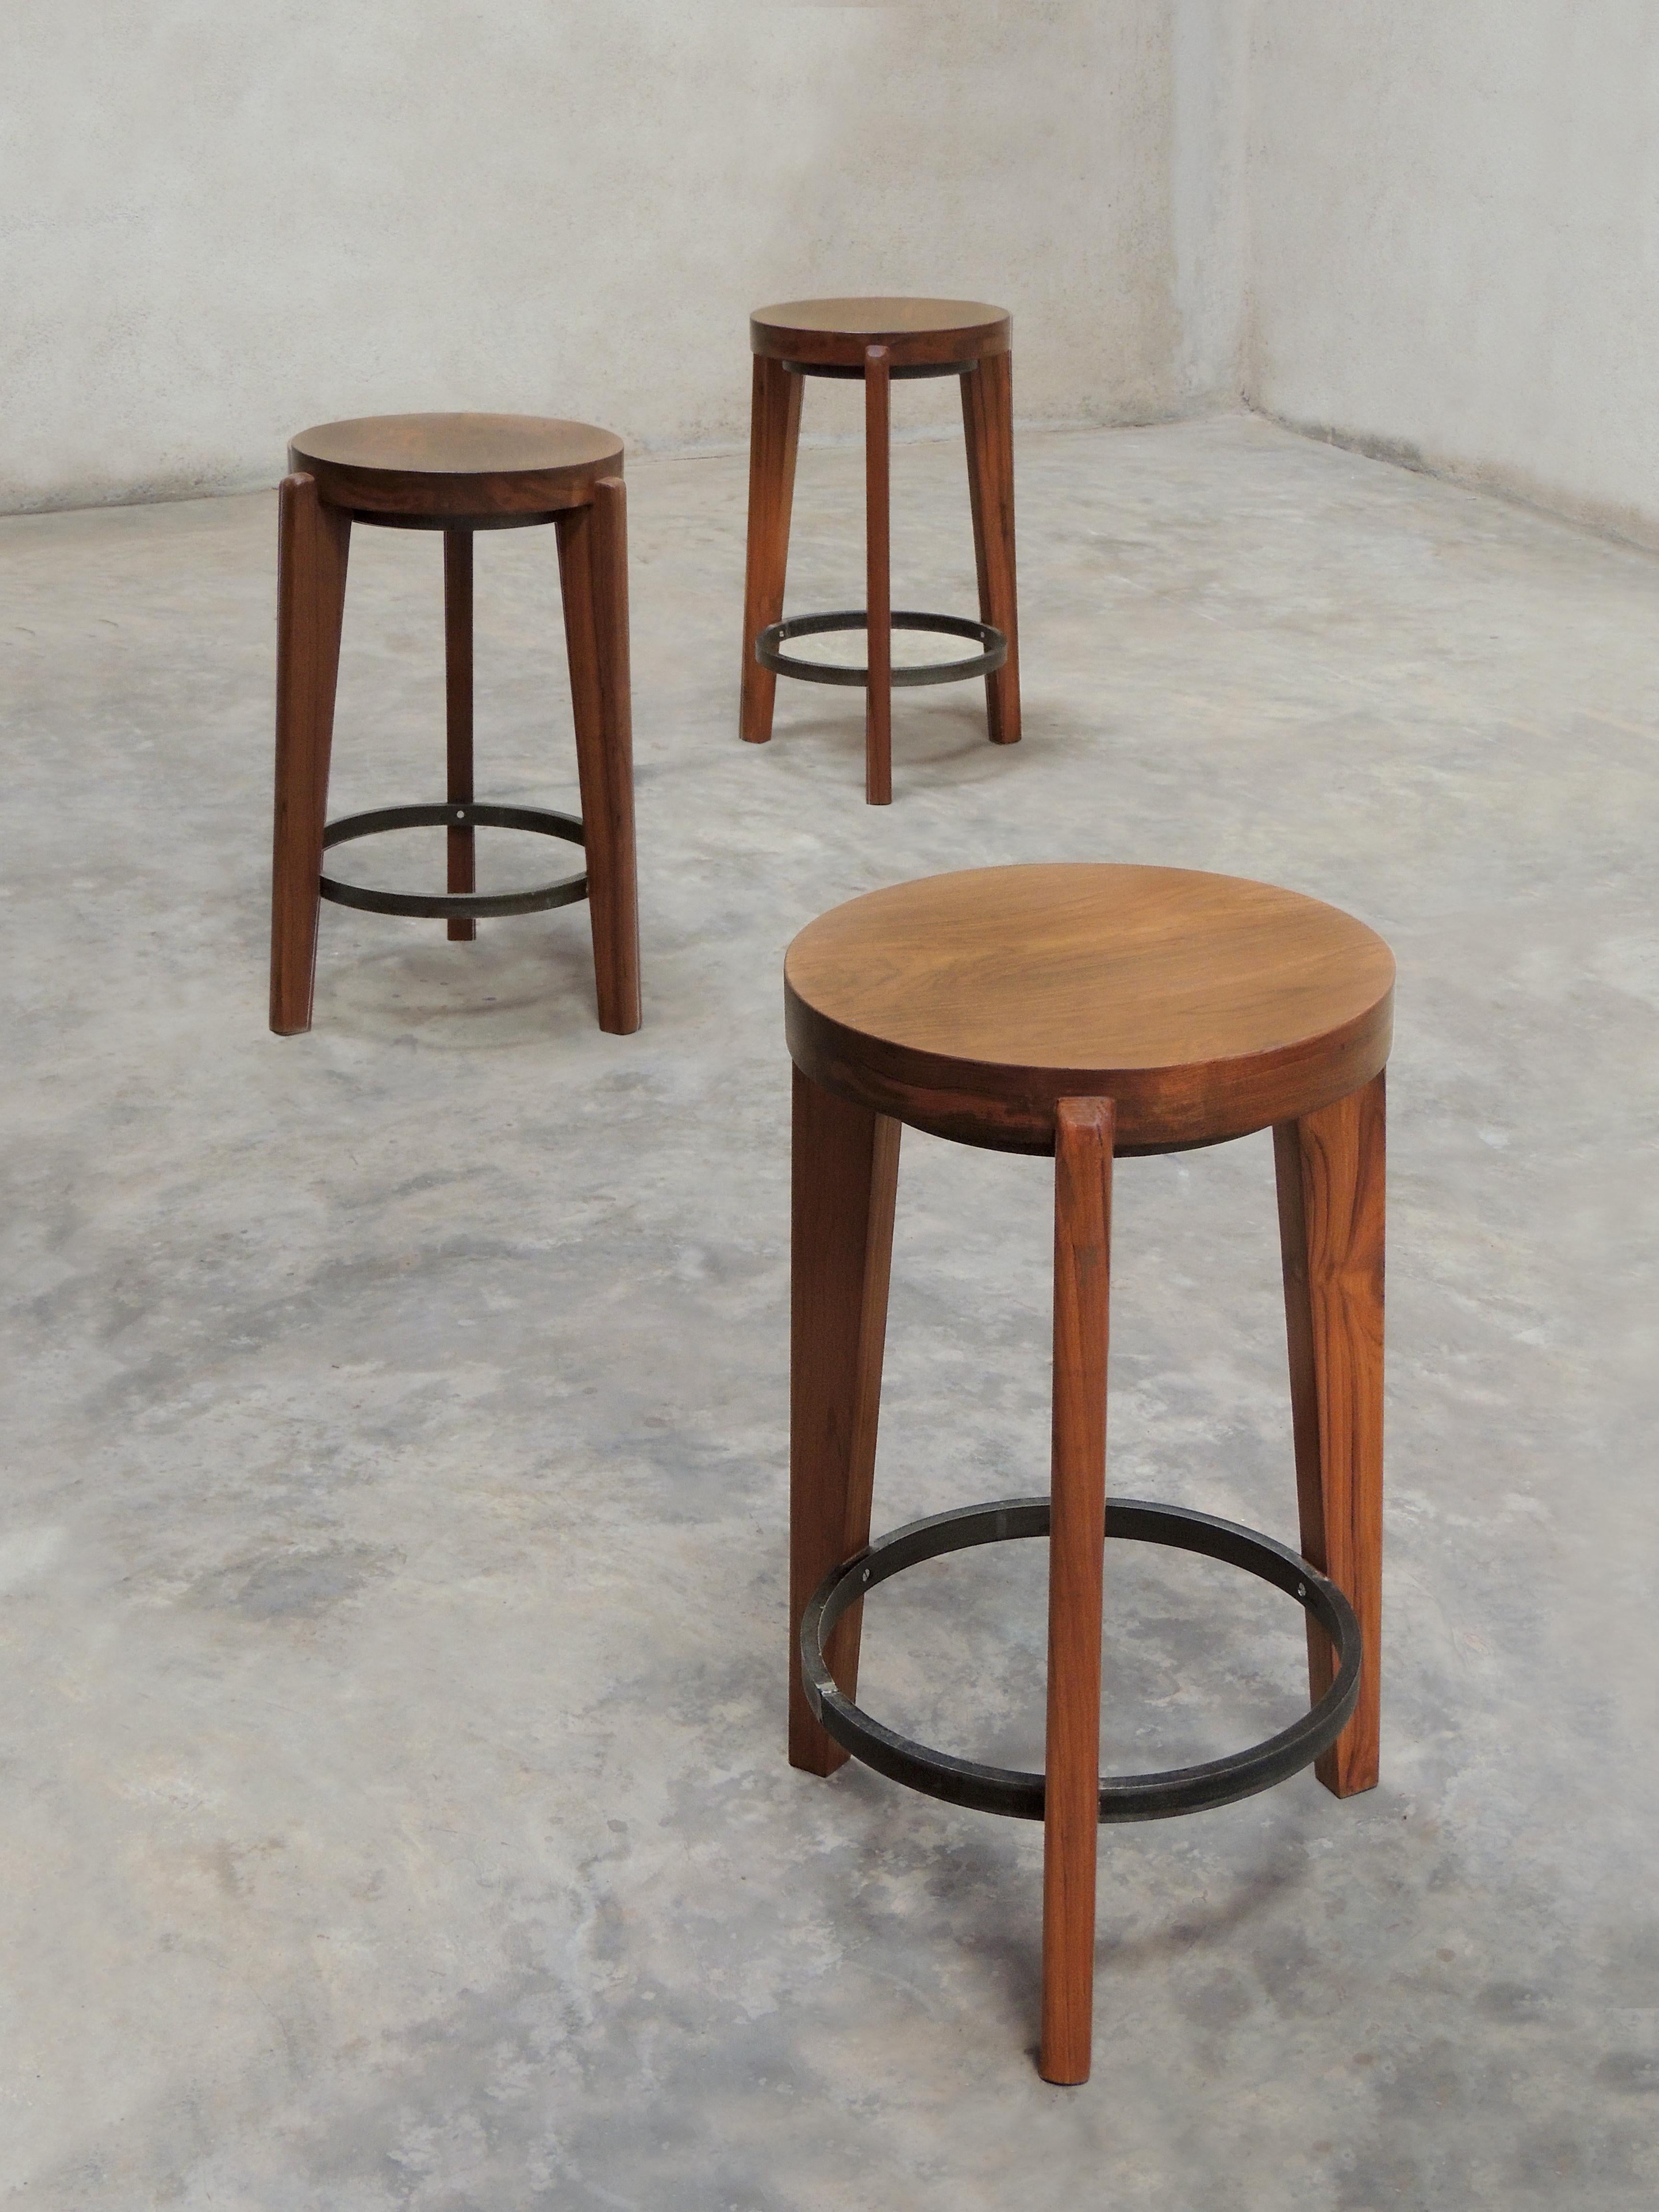 Pierre Jeanneret's Side Table/Stool, Hand-Sculpted Contemporary Reedition im Zustand „Neu“ in Geneve, CH